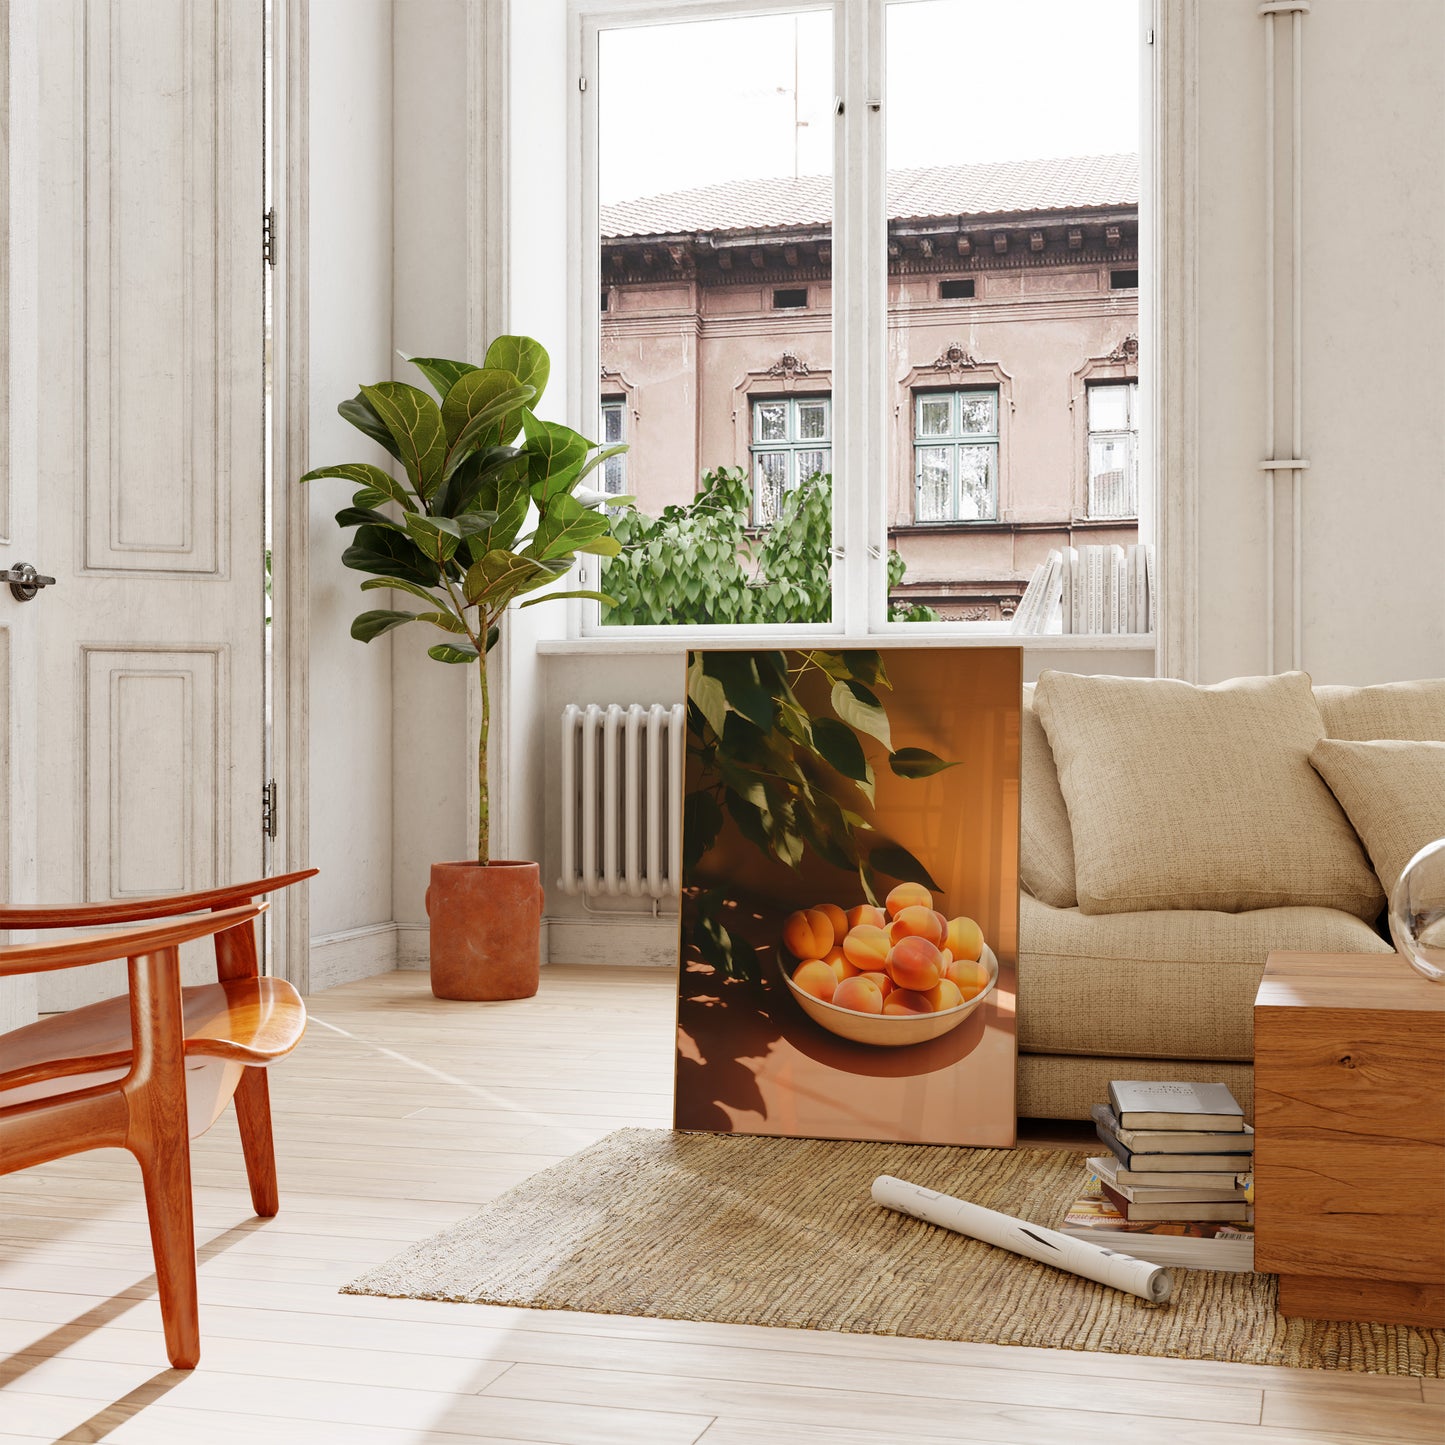 A cozy living room with a sofa, wooden table, large plant, and a painting of peaches by a sunny window.